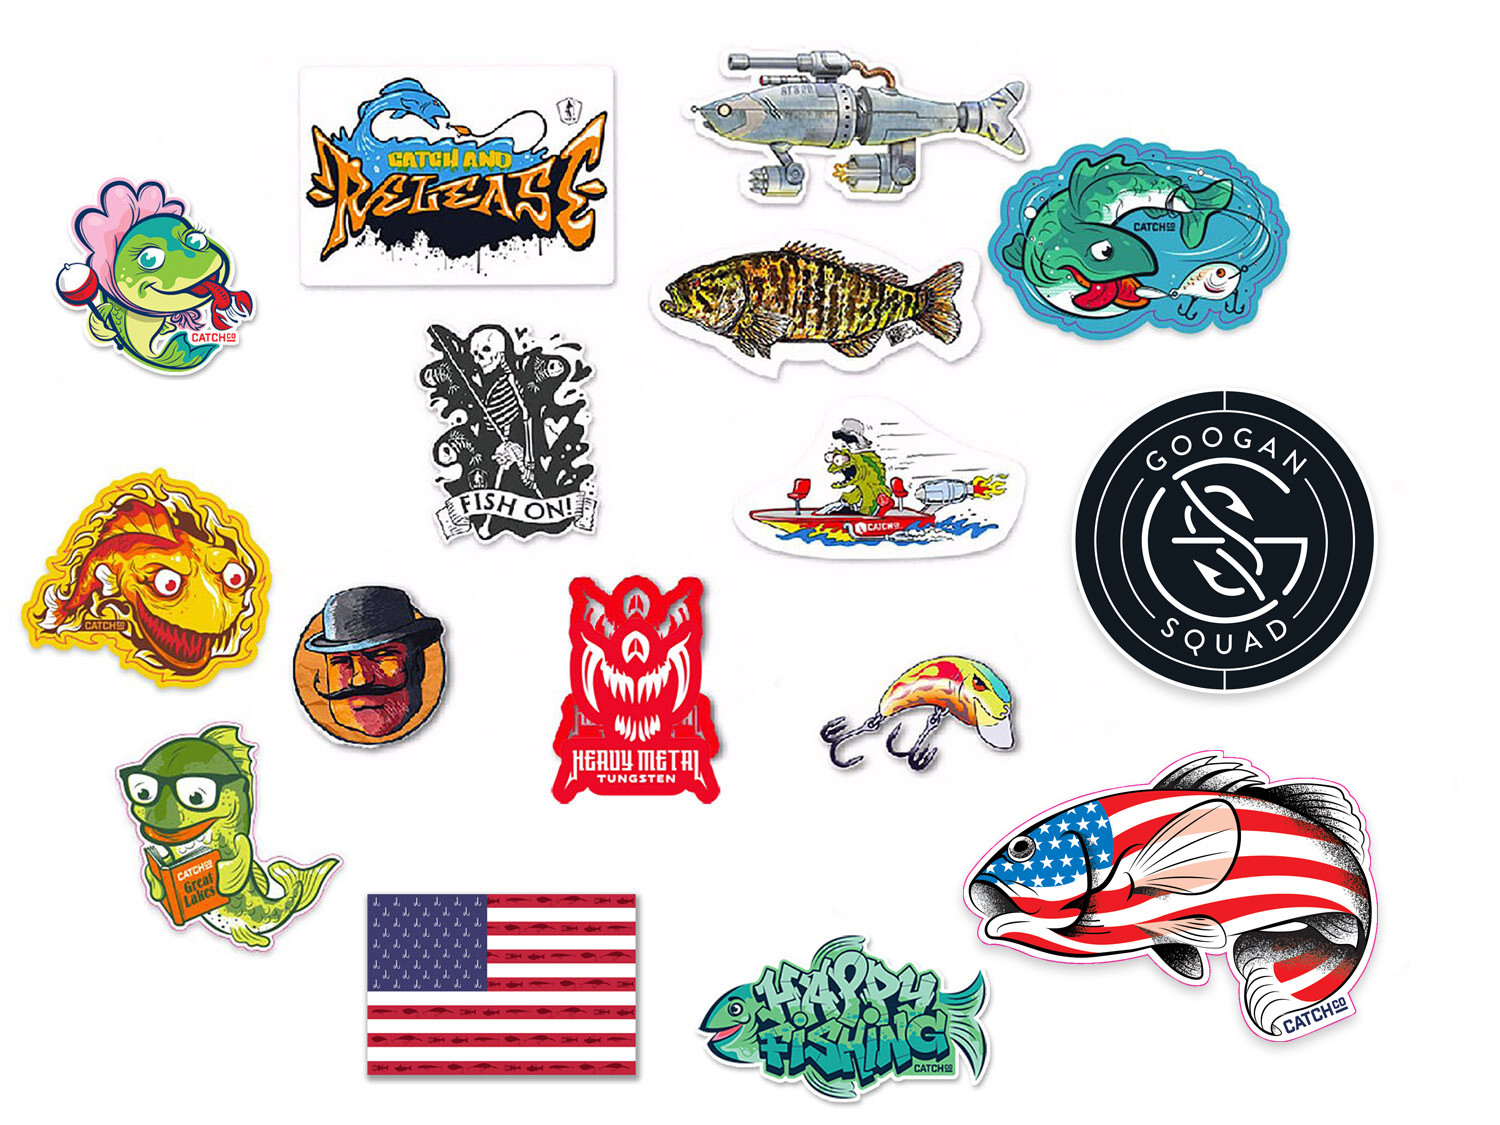 5" Zoom High Quality Decal Sticker Tackle Box Lures Fishing Boat Truck Baits 